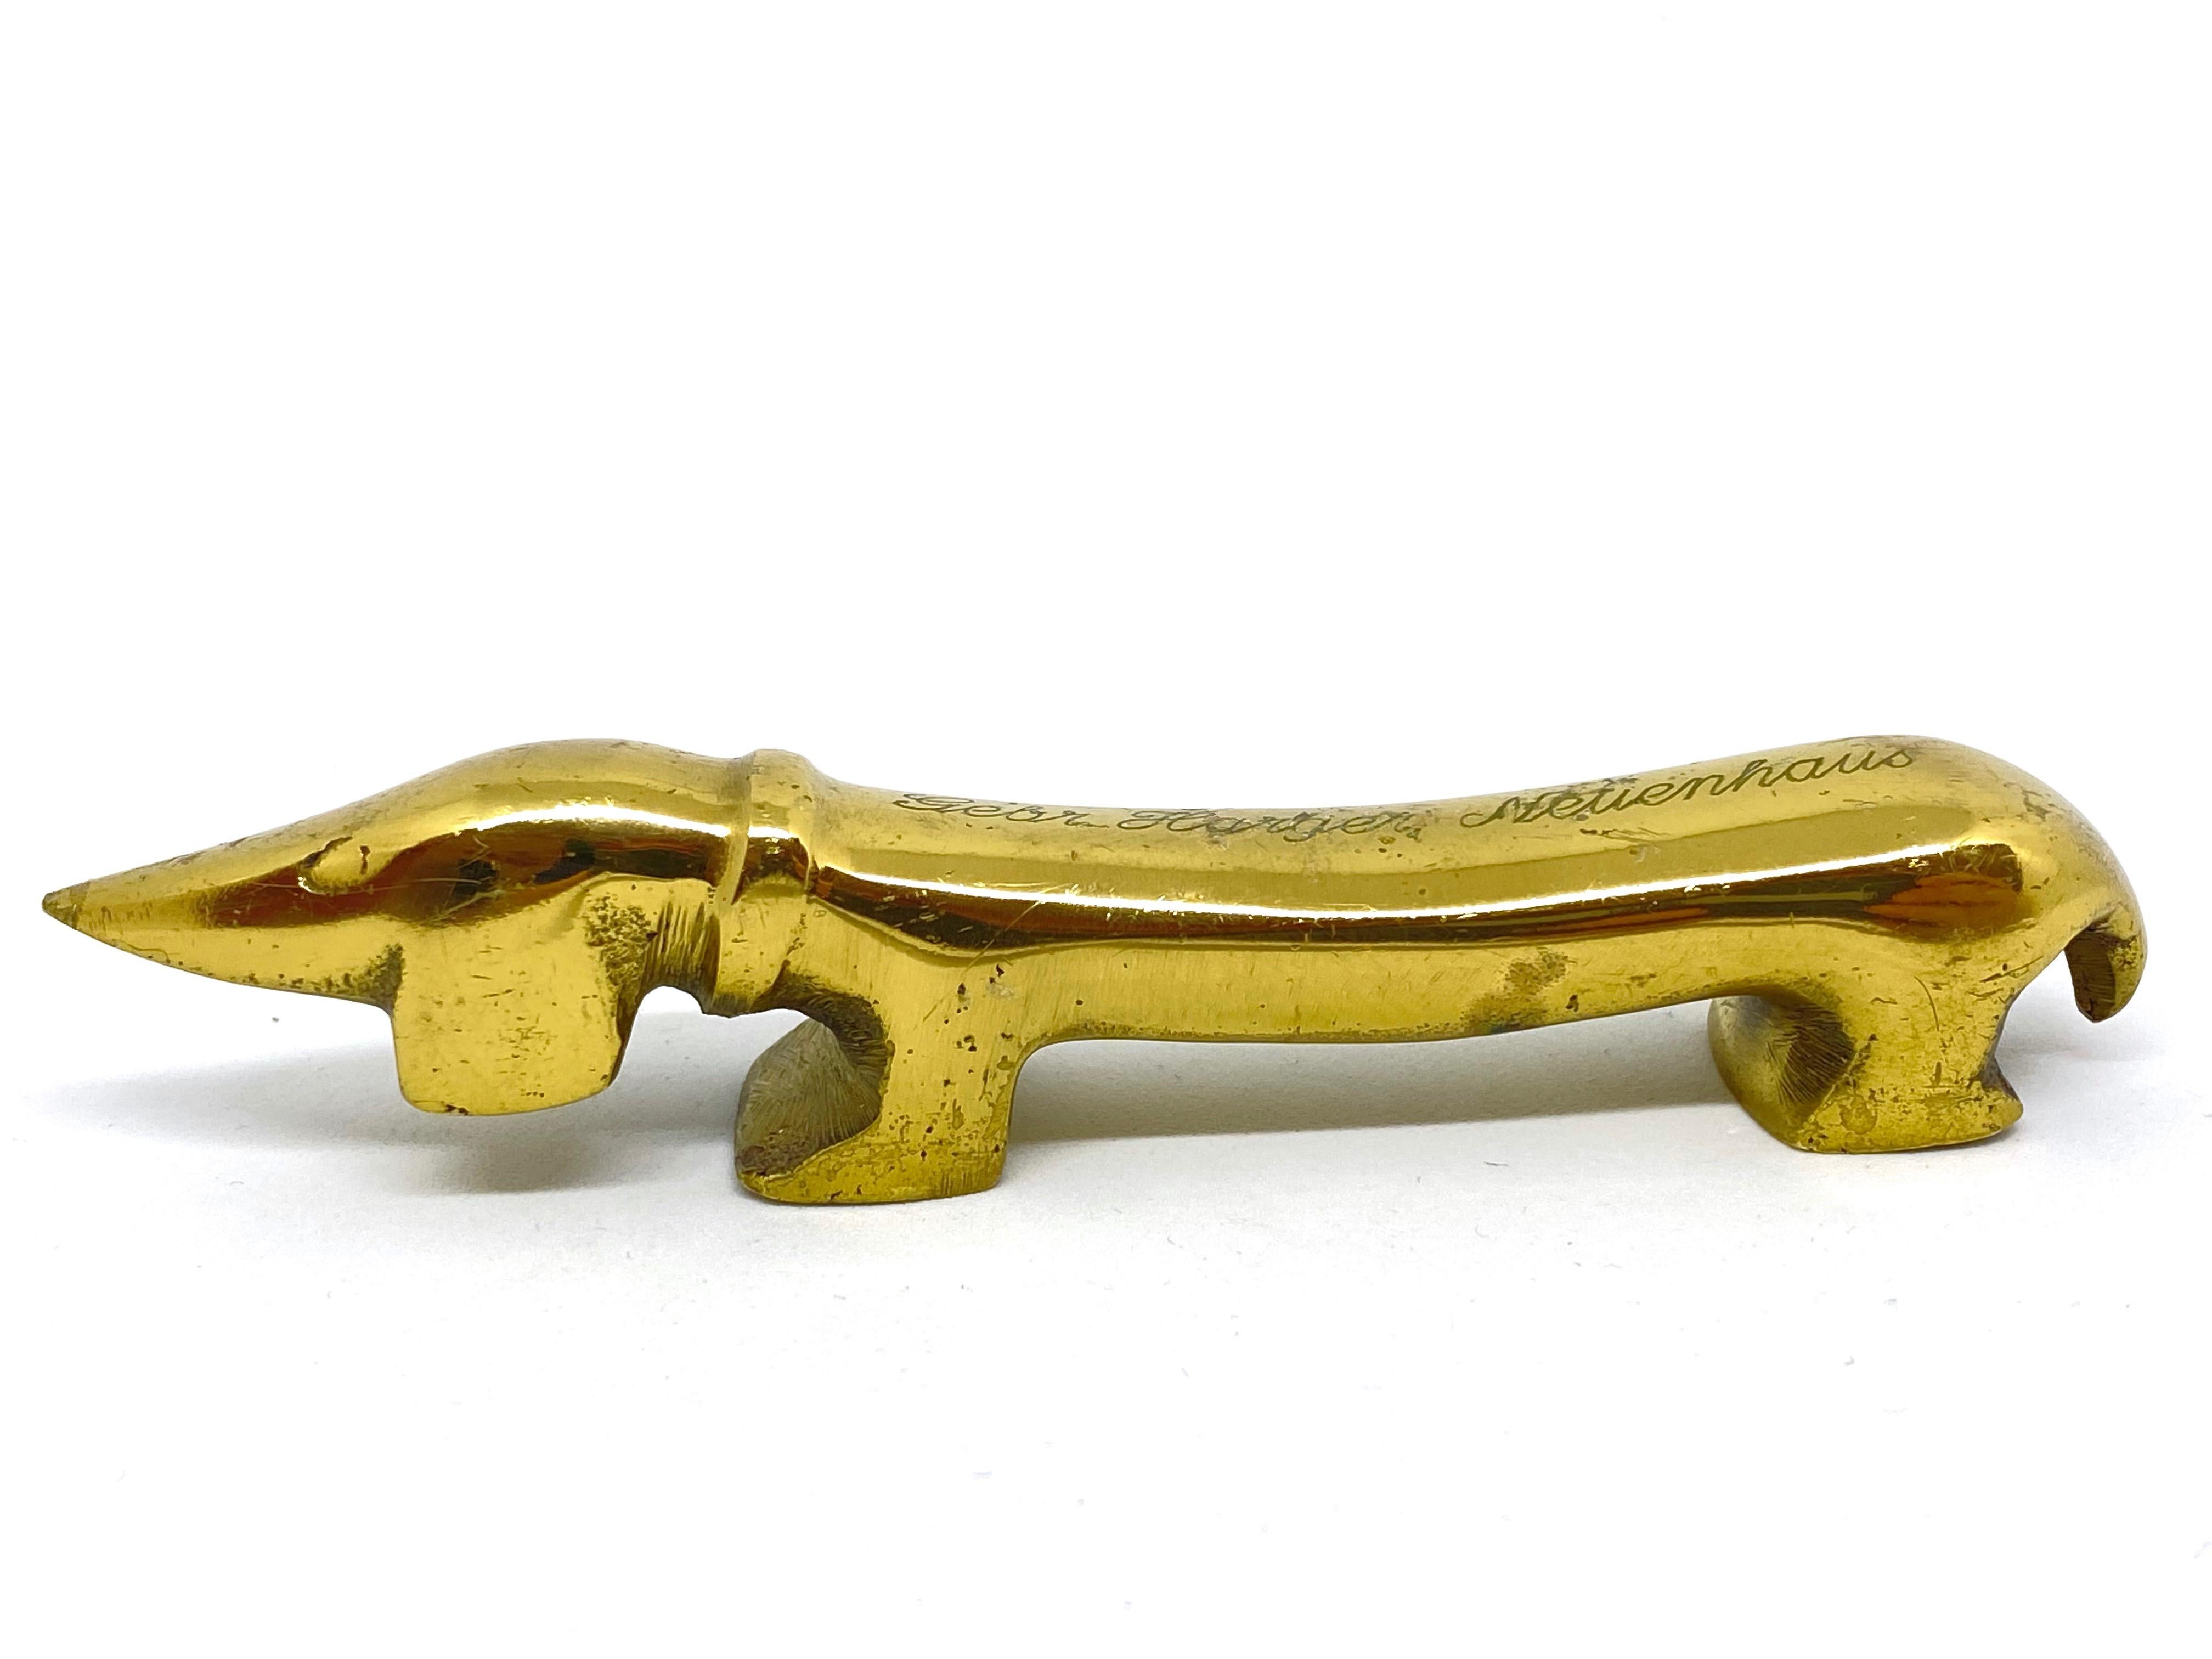 Classic early 1950s Austrian bottle opener, attributed to be designed by Ludwig Bemelmans showing 